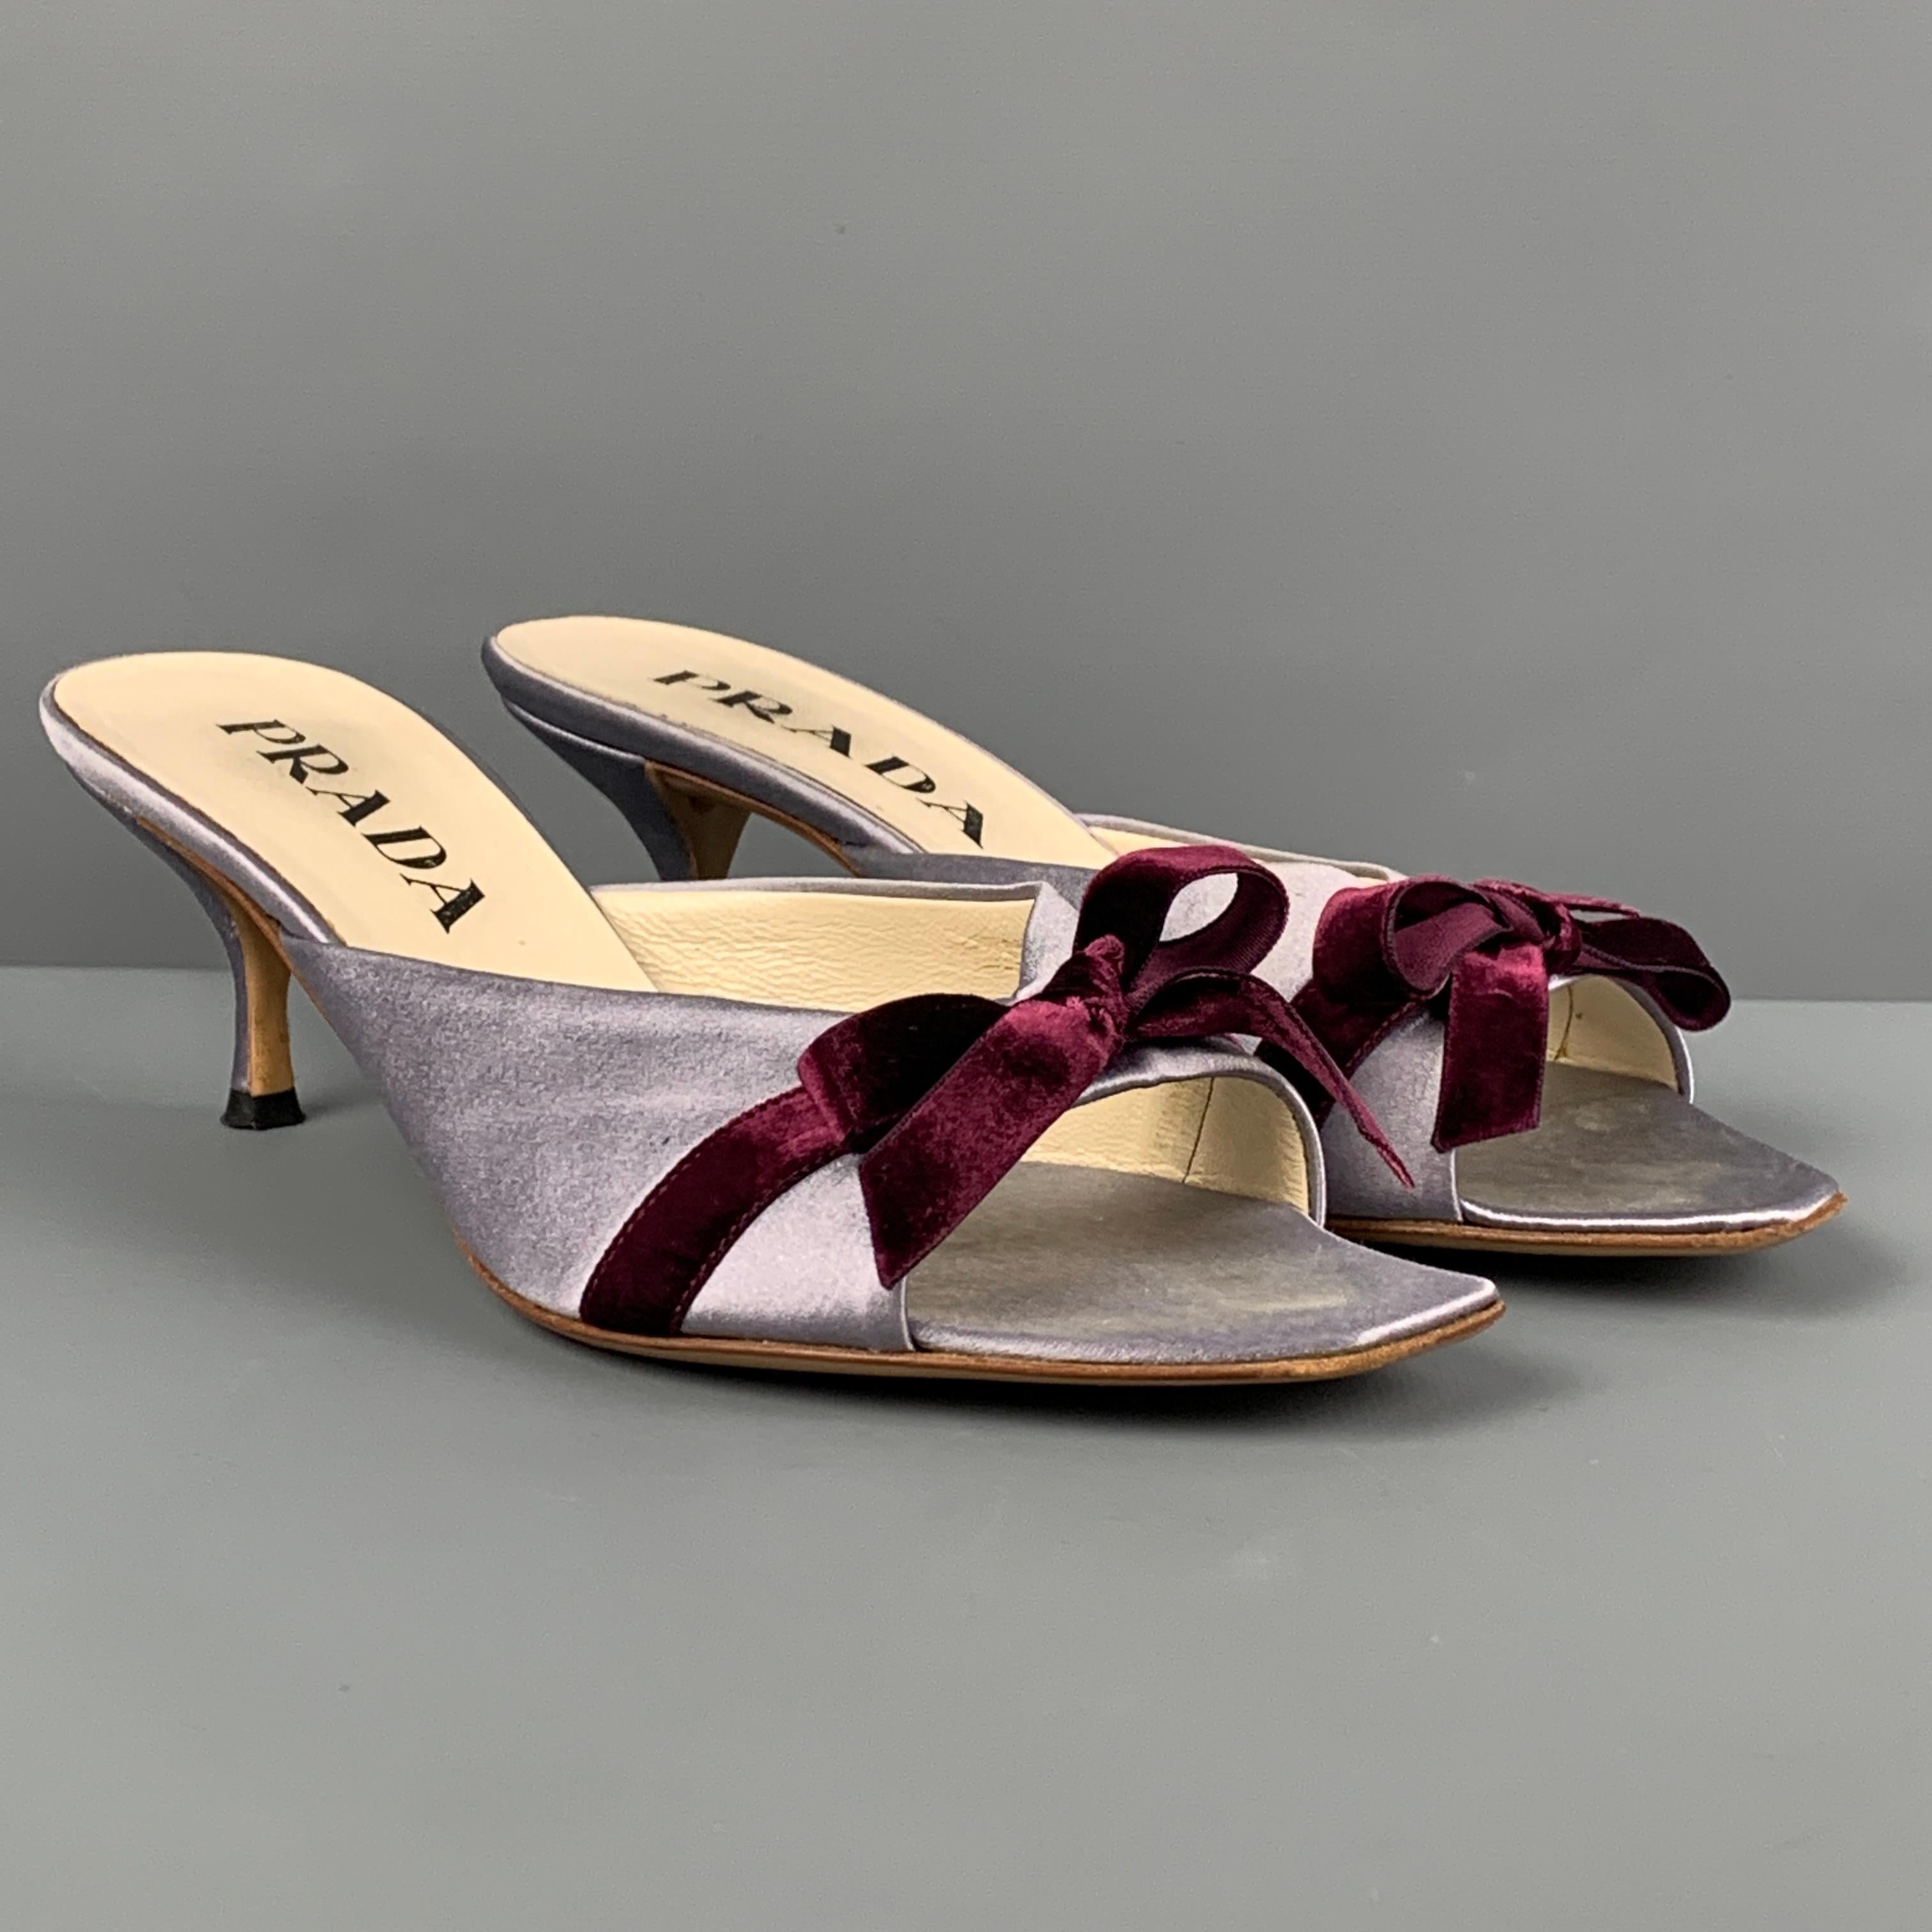 PRADA sandals comes in a lavender silk featuring a open toe, front bow detail, and a kitten heel. Made in Italy. 

Good Pre-Owned Condition. Light wear.
Marked: 35.5

Outsole: 2.25 in. 